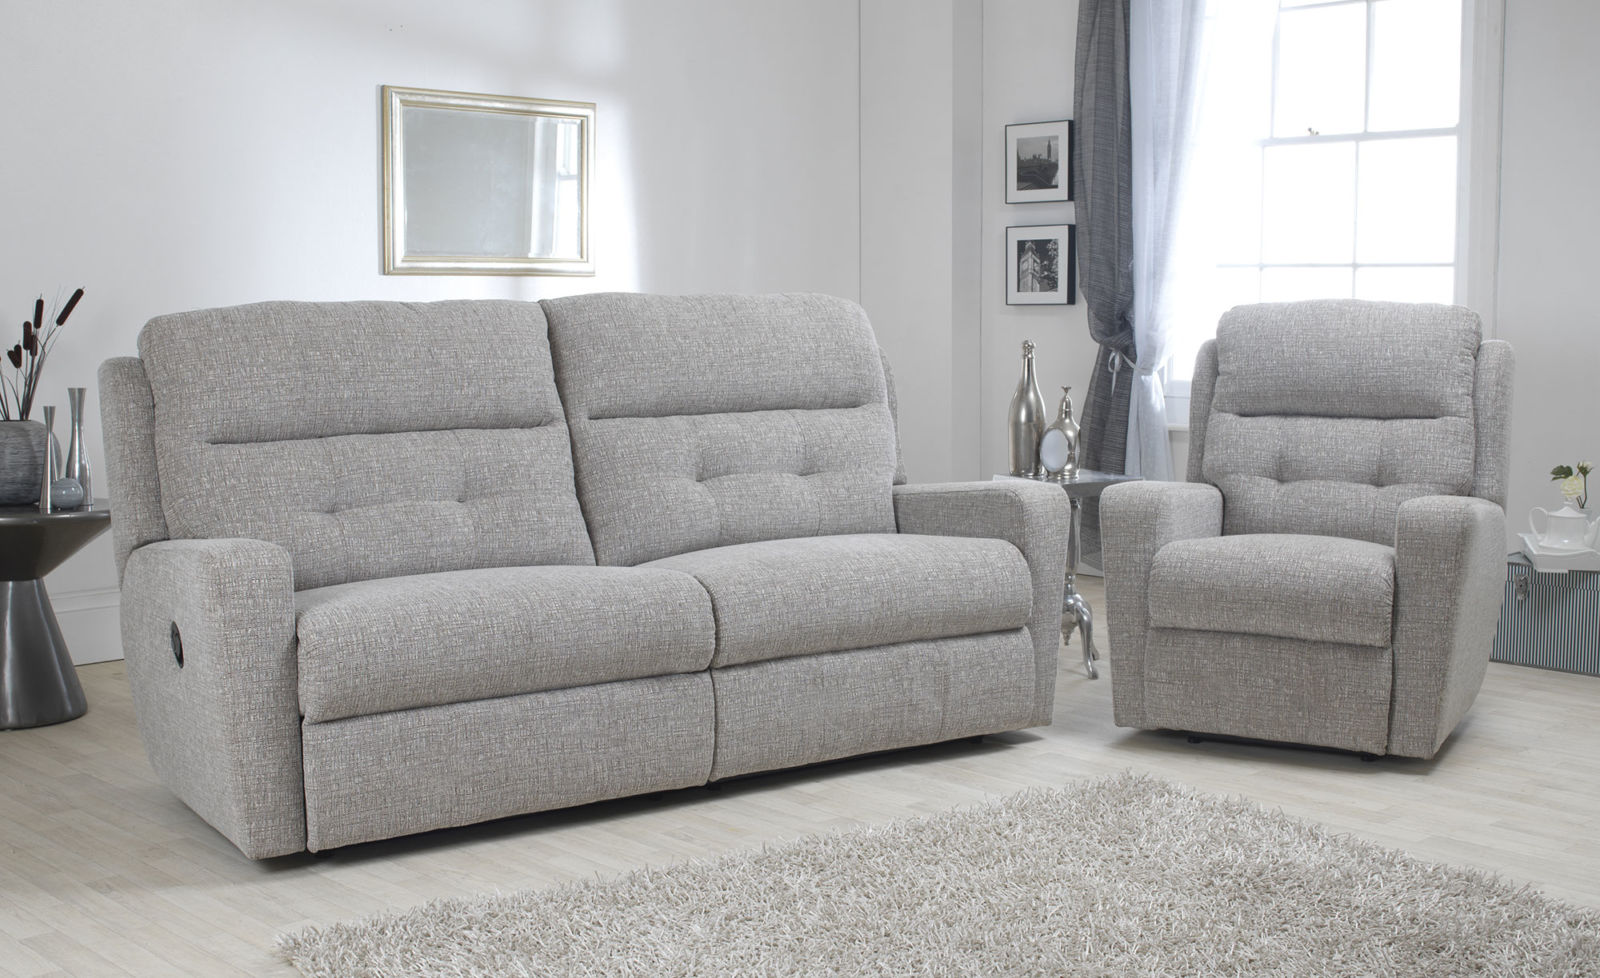 Furnico Sofas and Chairs in Cornwall from Solomons Furniture